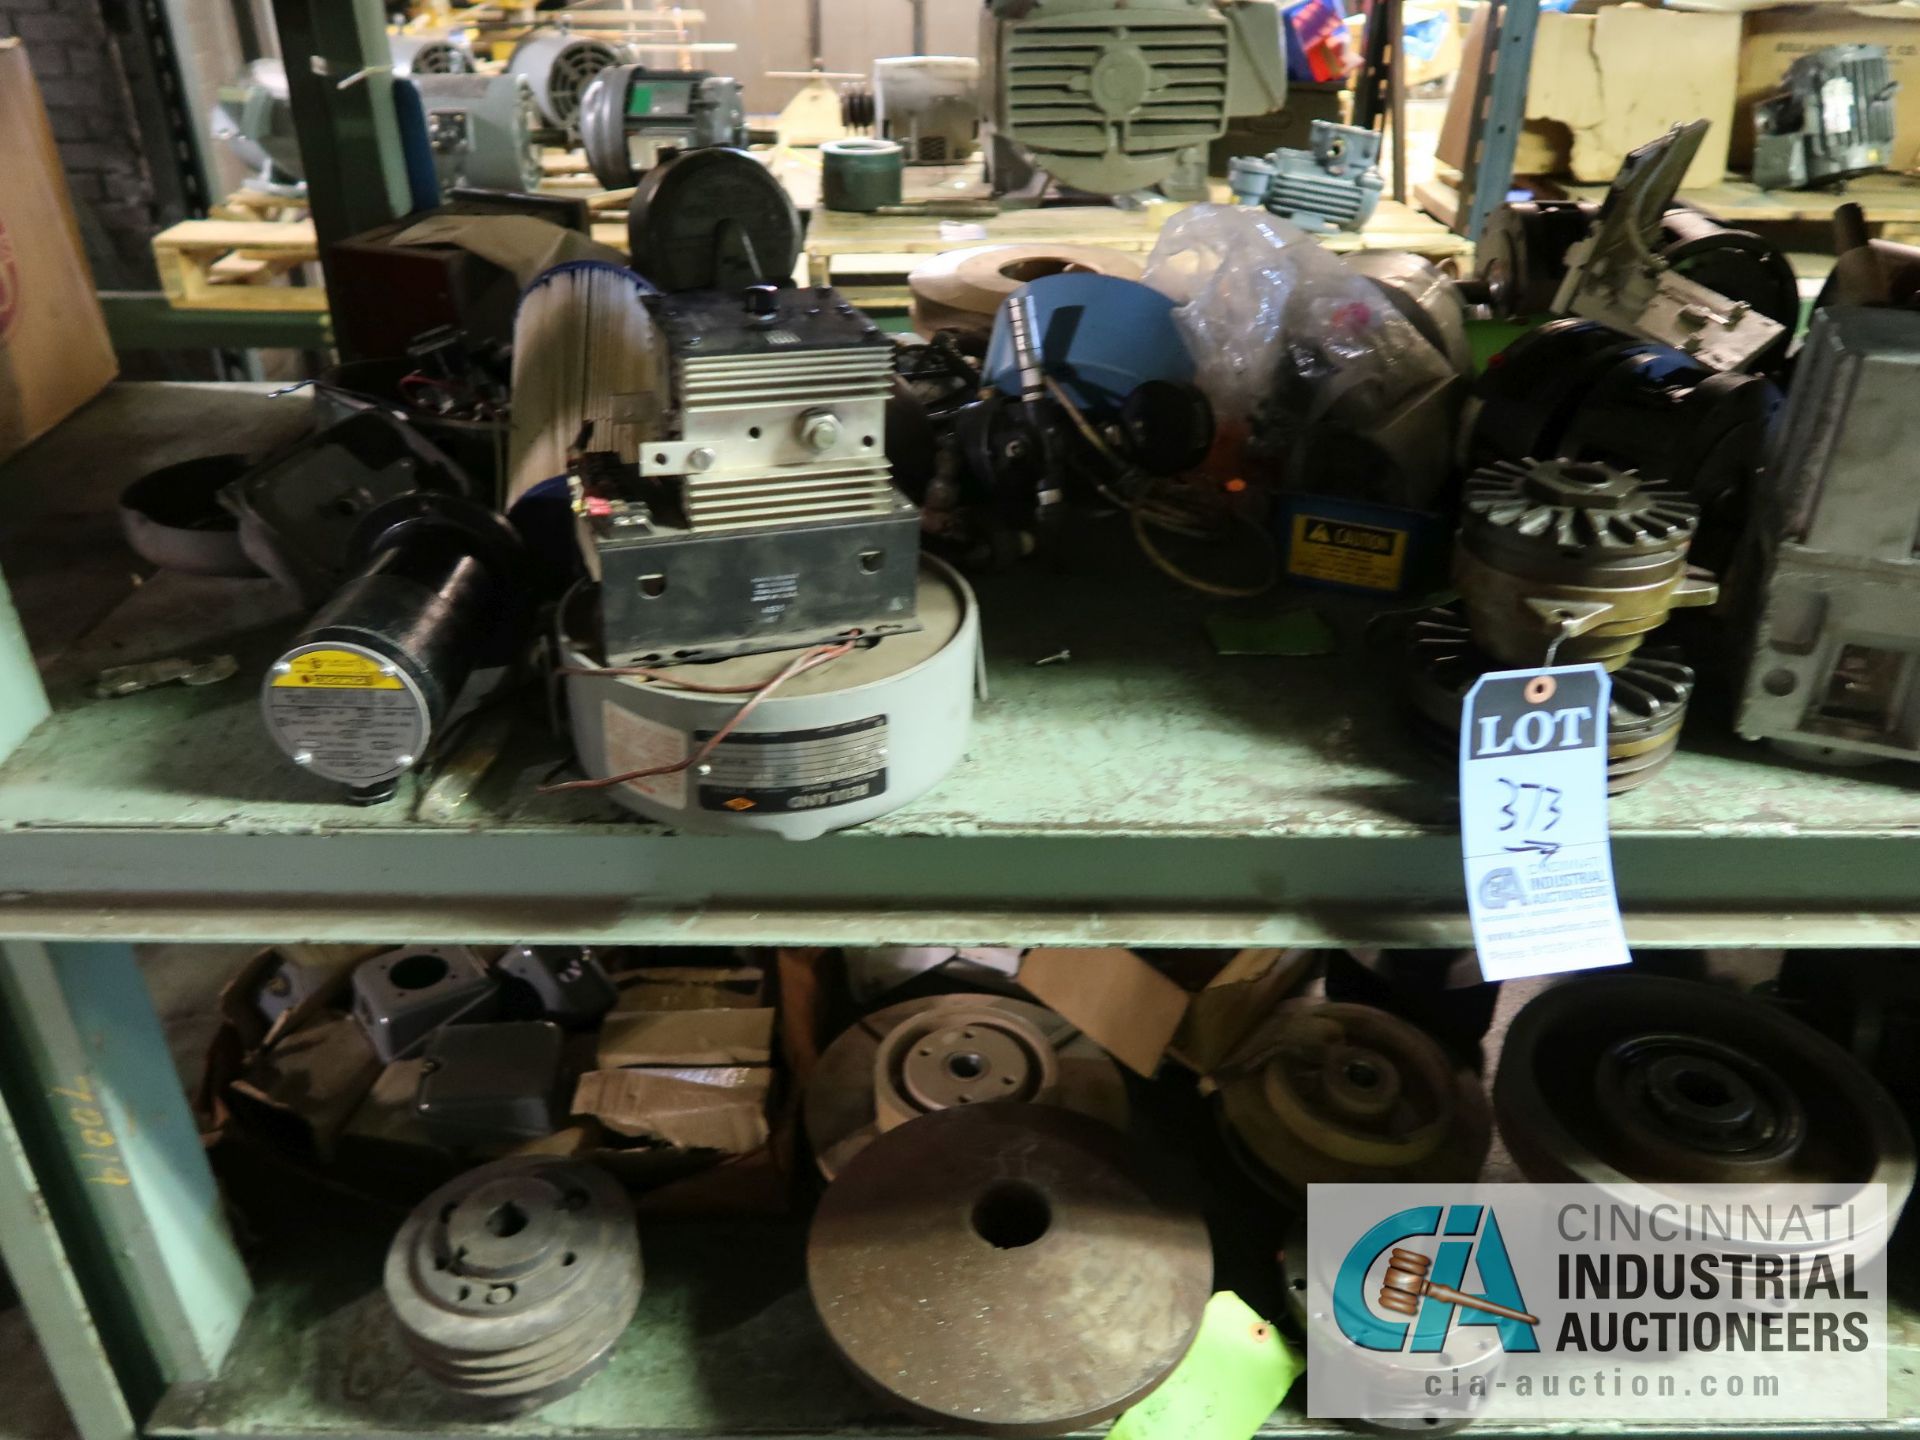 (LOT) MACHINE PARTS, COMPRESSORS, REDUCERS, GEARS, MOTORS, AND OTHER (4) SECTIONS RACK - Image 15 of 28